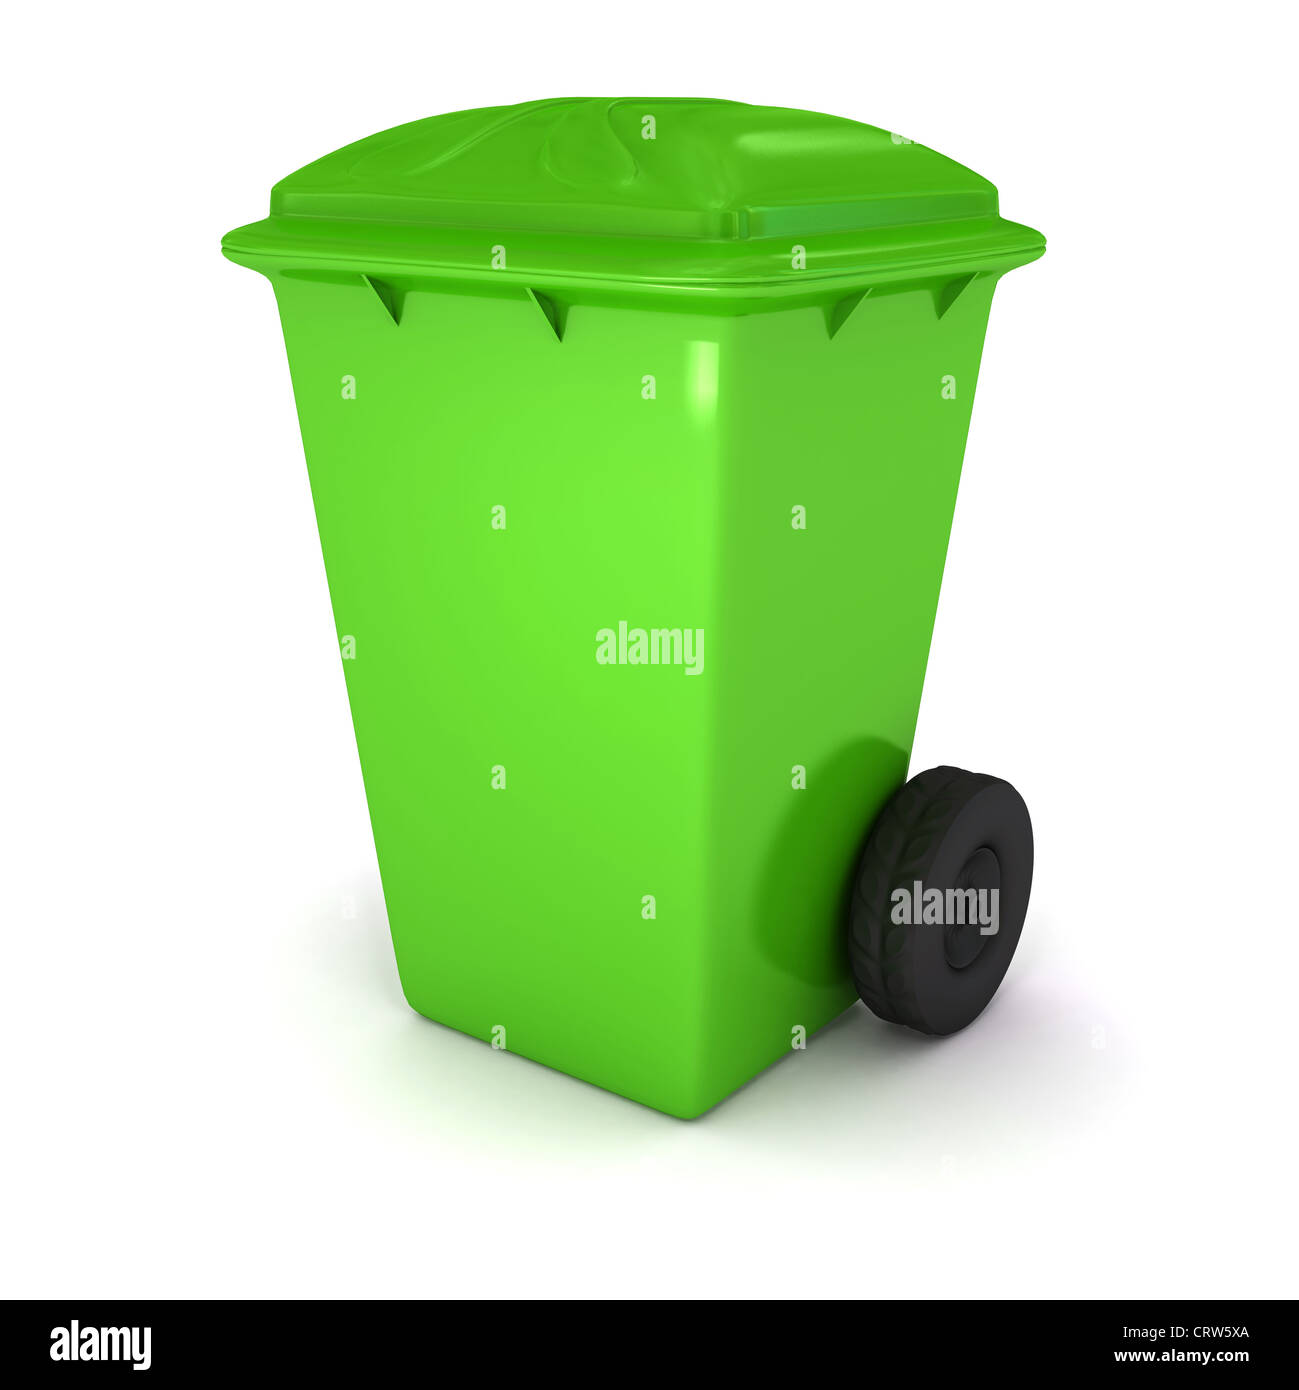 The green garbage container over white background Stock Photo